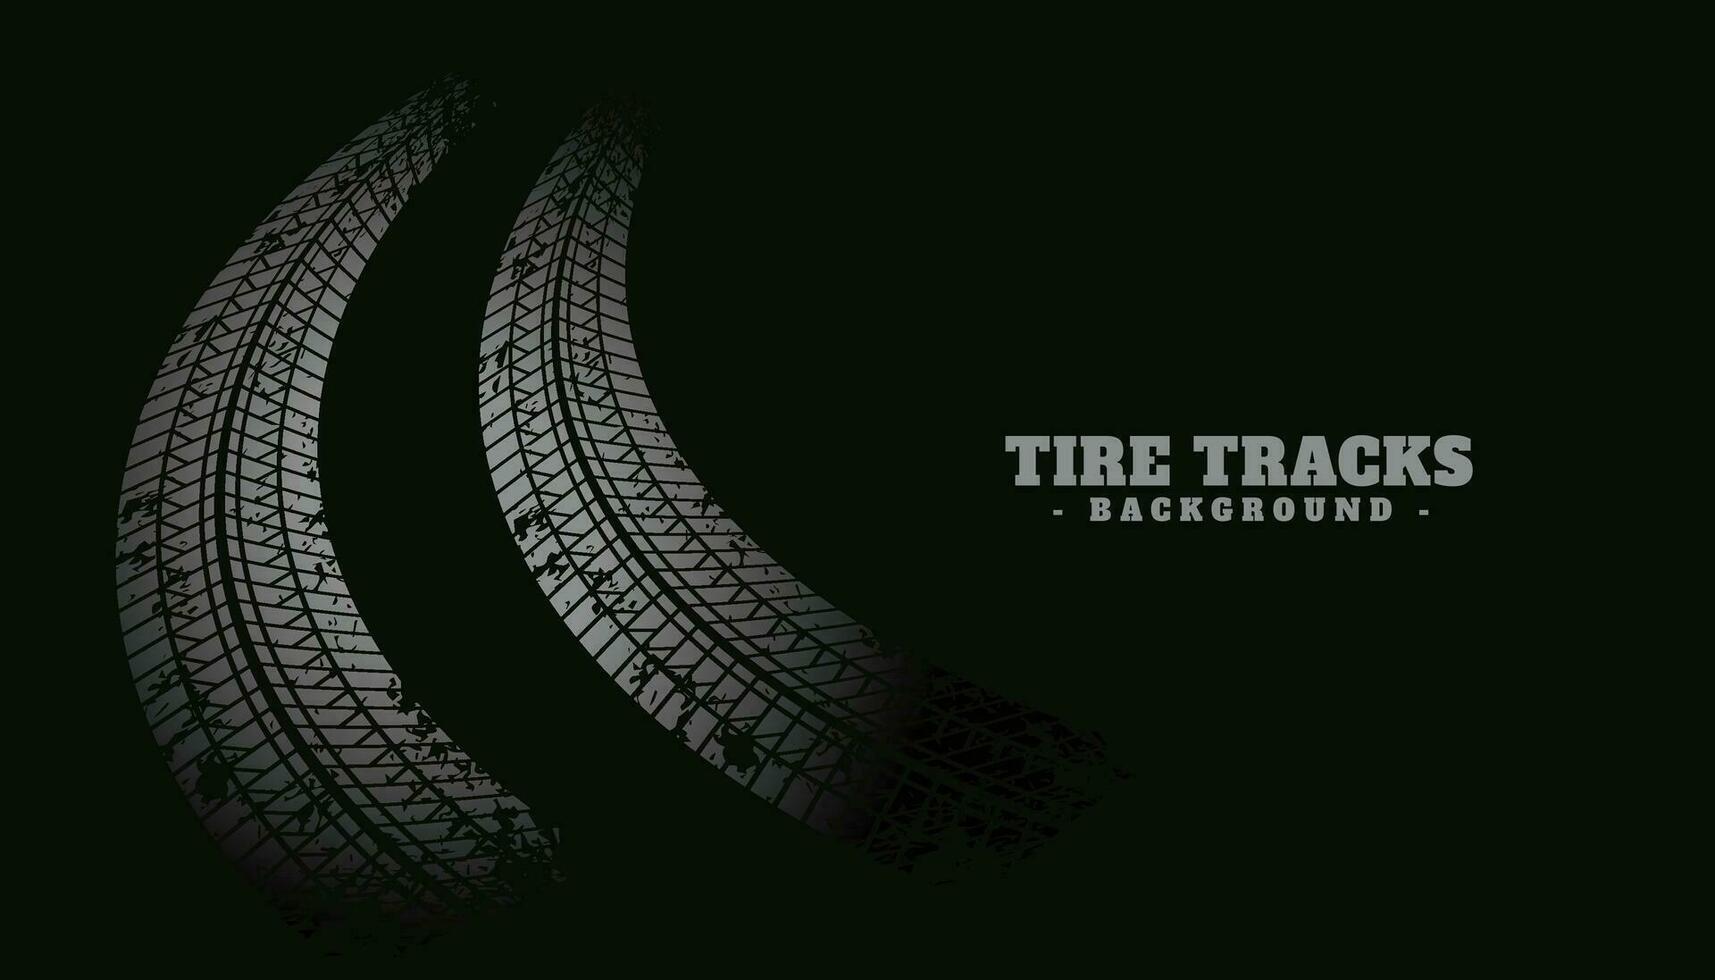 tire track print texture on black background vector